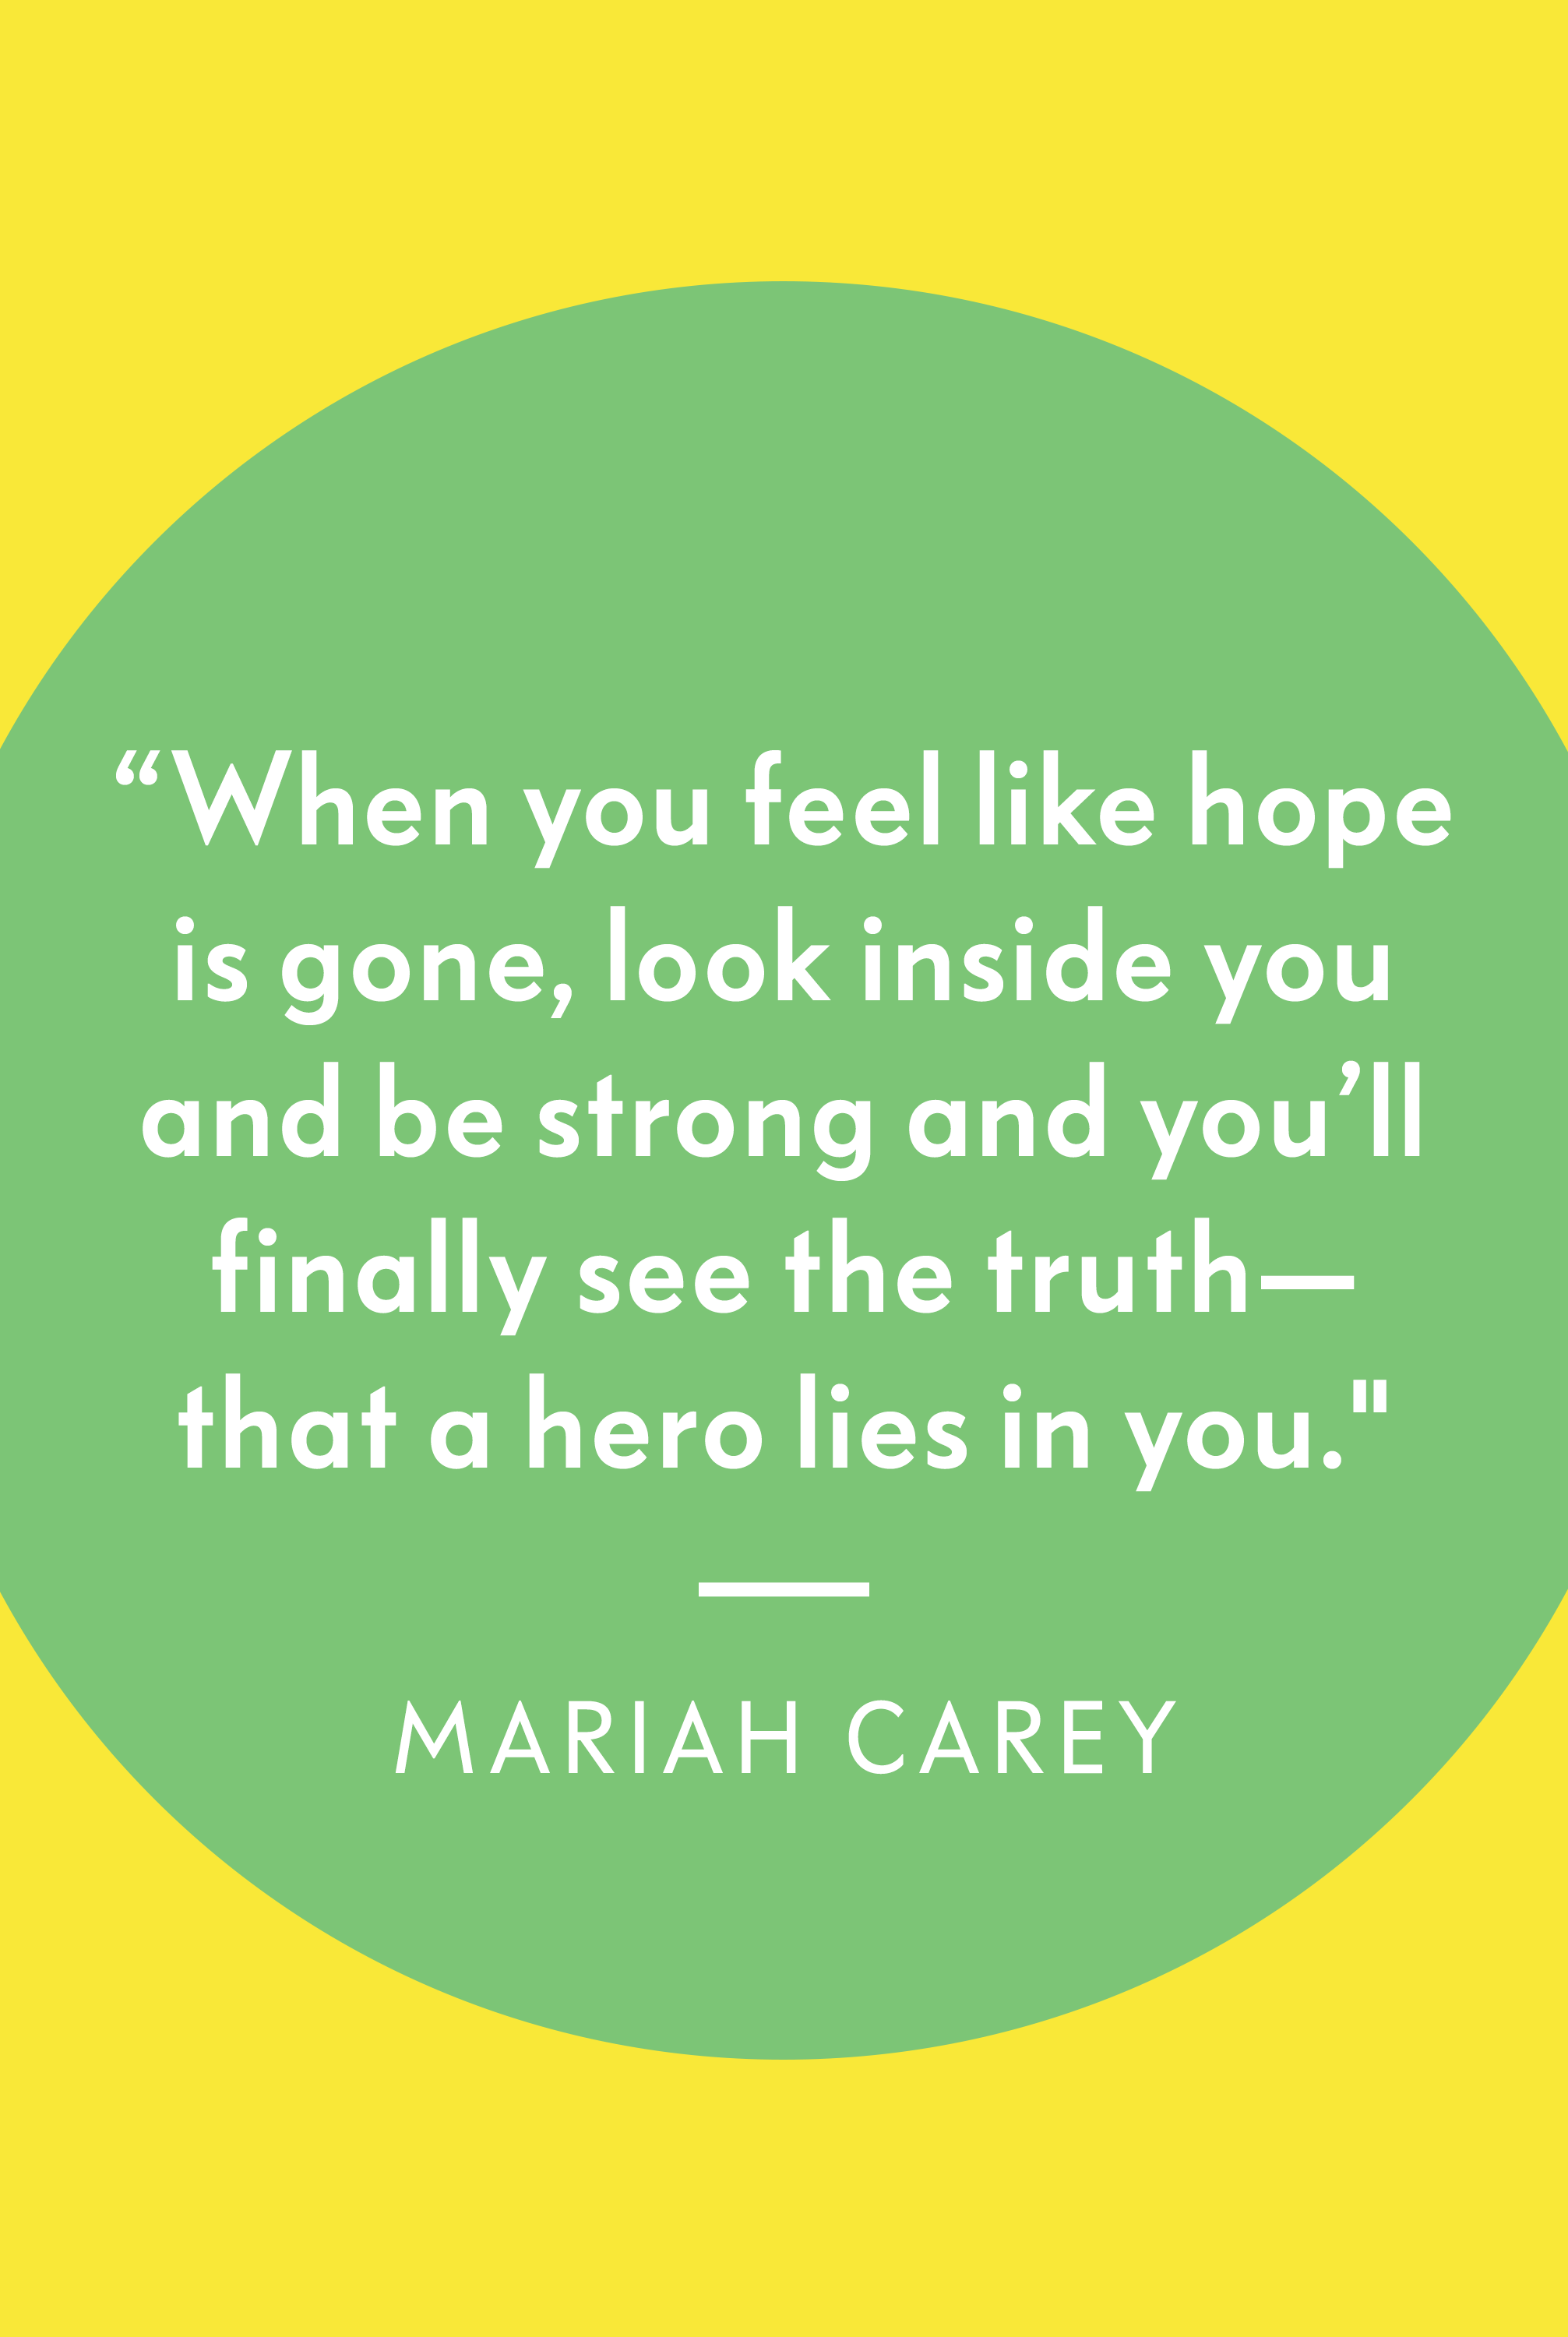 when you feel like hope is gone, look inside you and be strong and you’ll finally see the truth that a hero lies in you. mariah carey